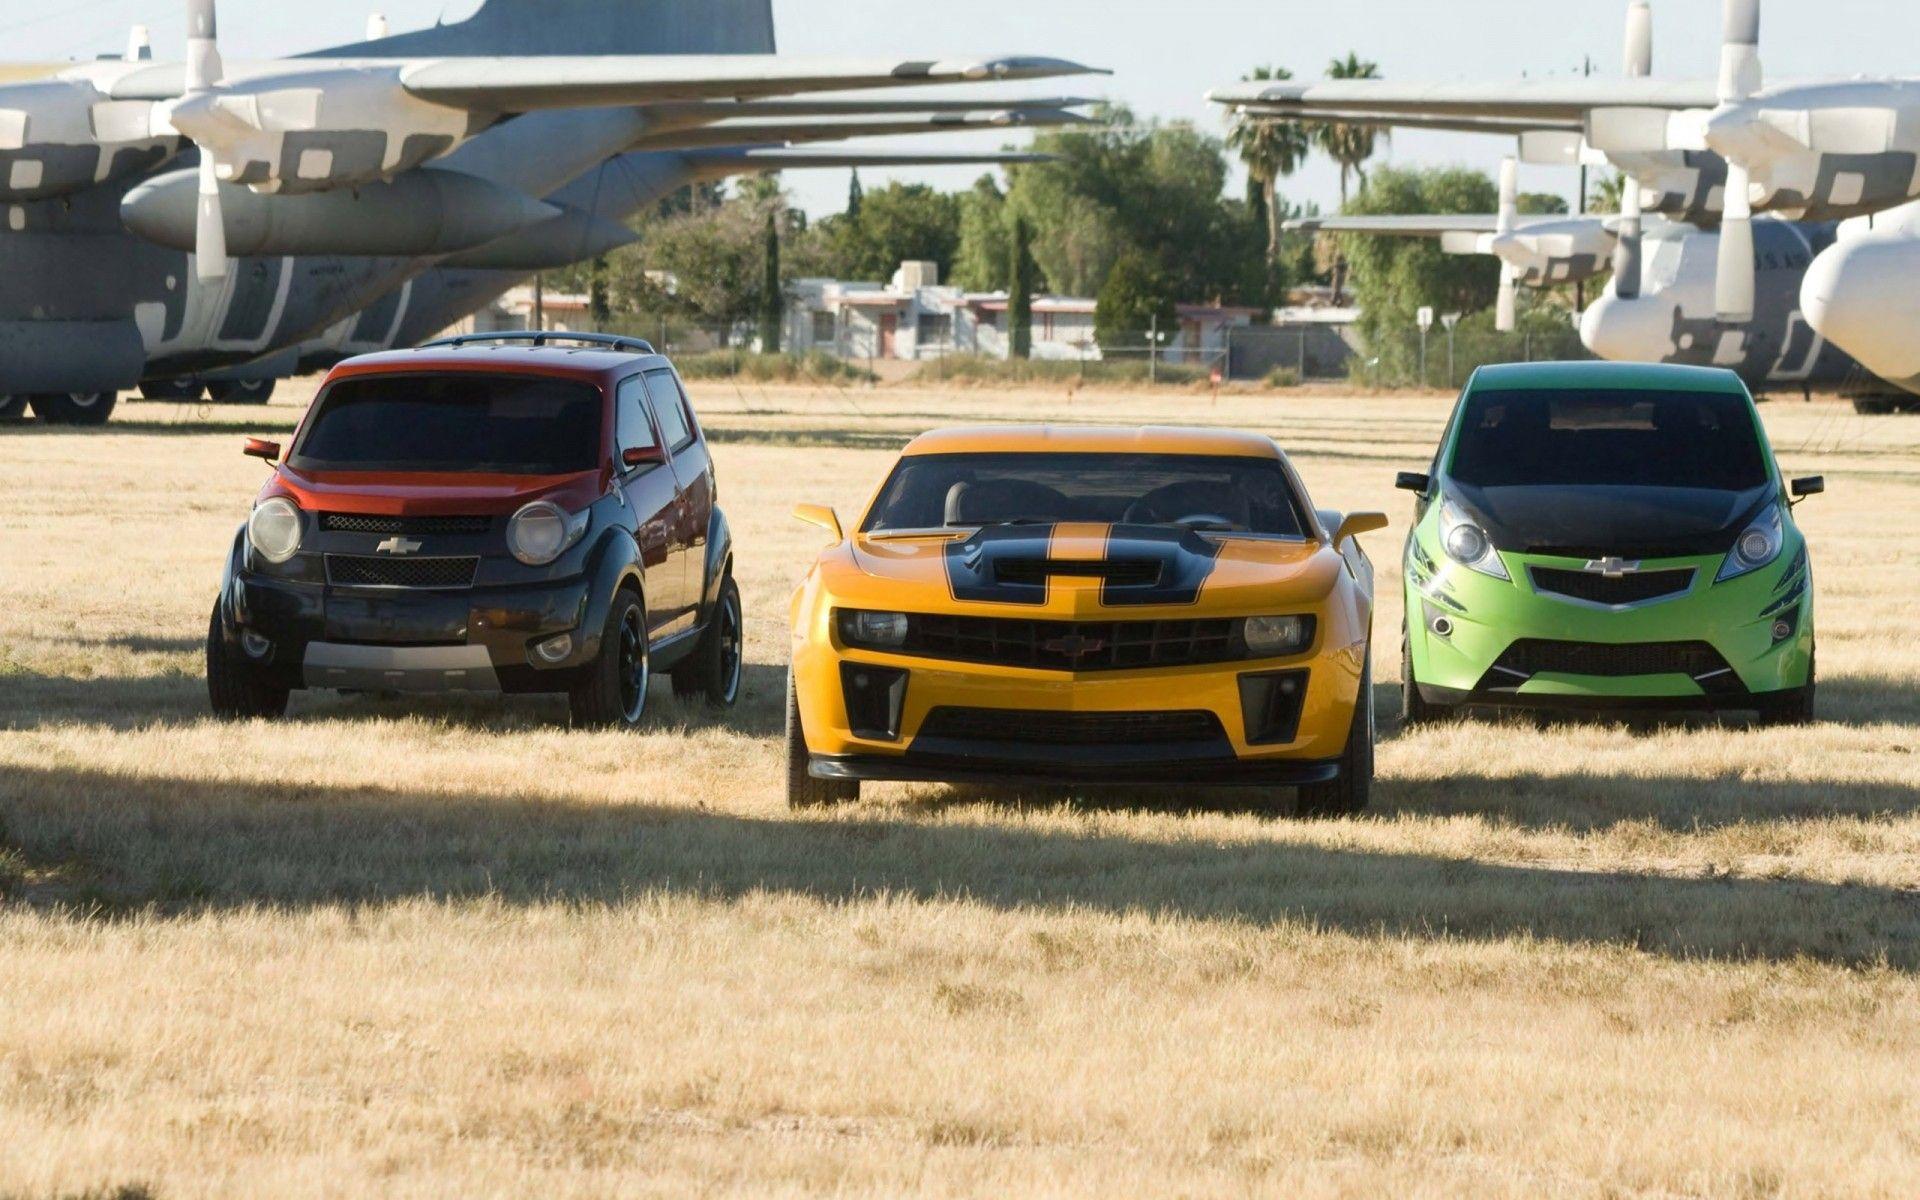 Cars from Transformers. Android wallpaper for free